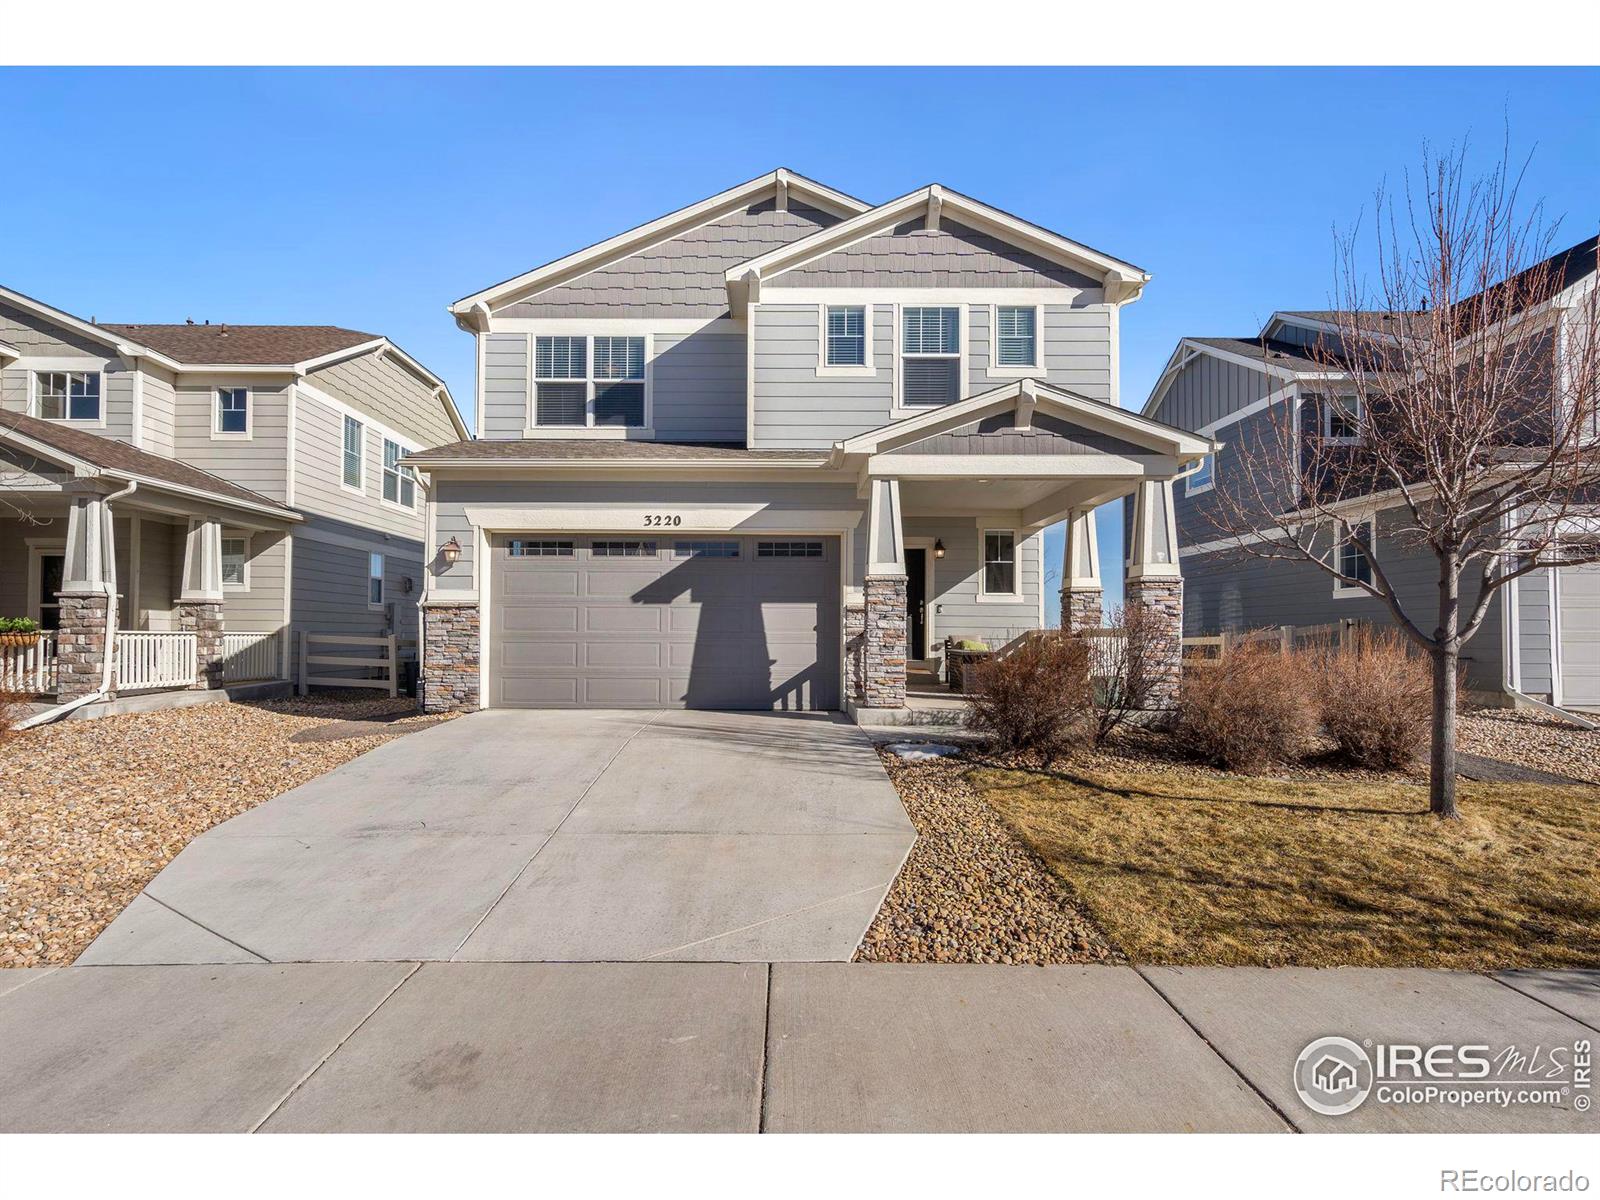 3220  Anika Drive, fort collins MLS: 4567891002516 Beds: 4 Baths: 4 Price: $645,000